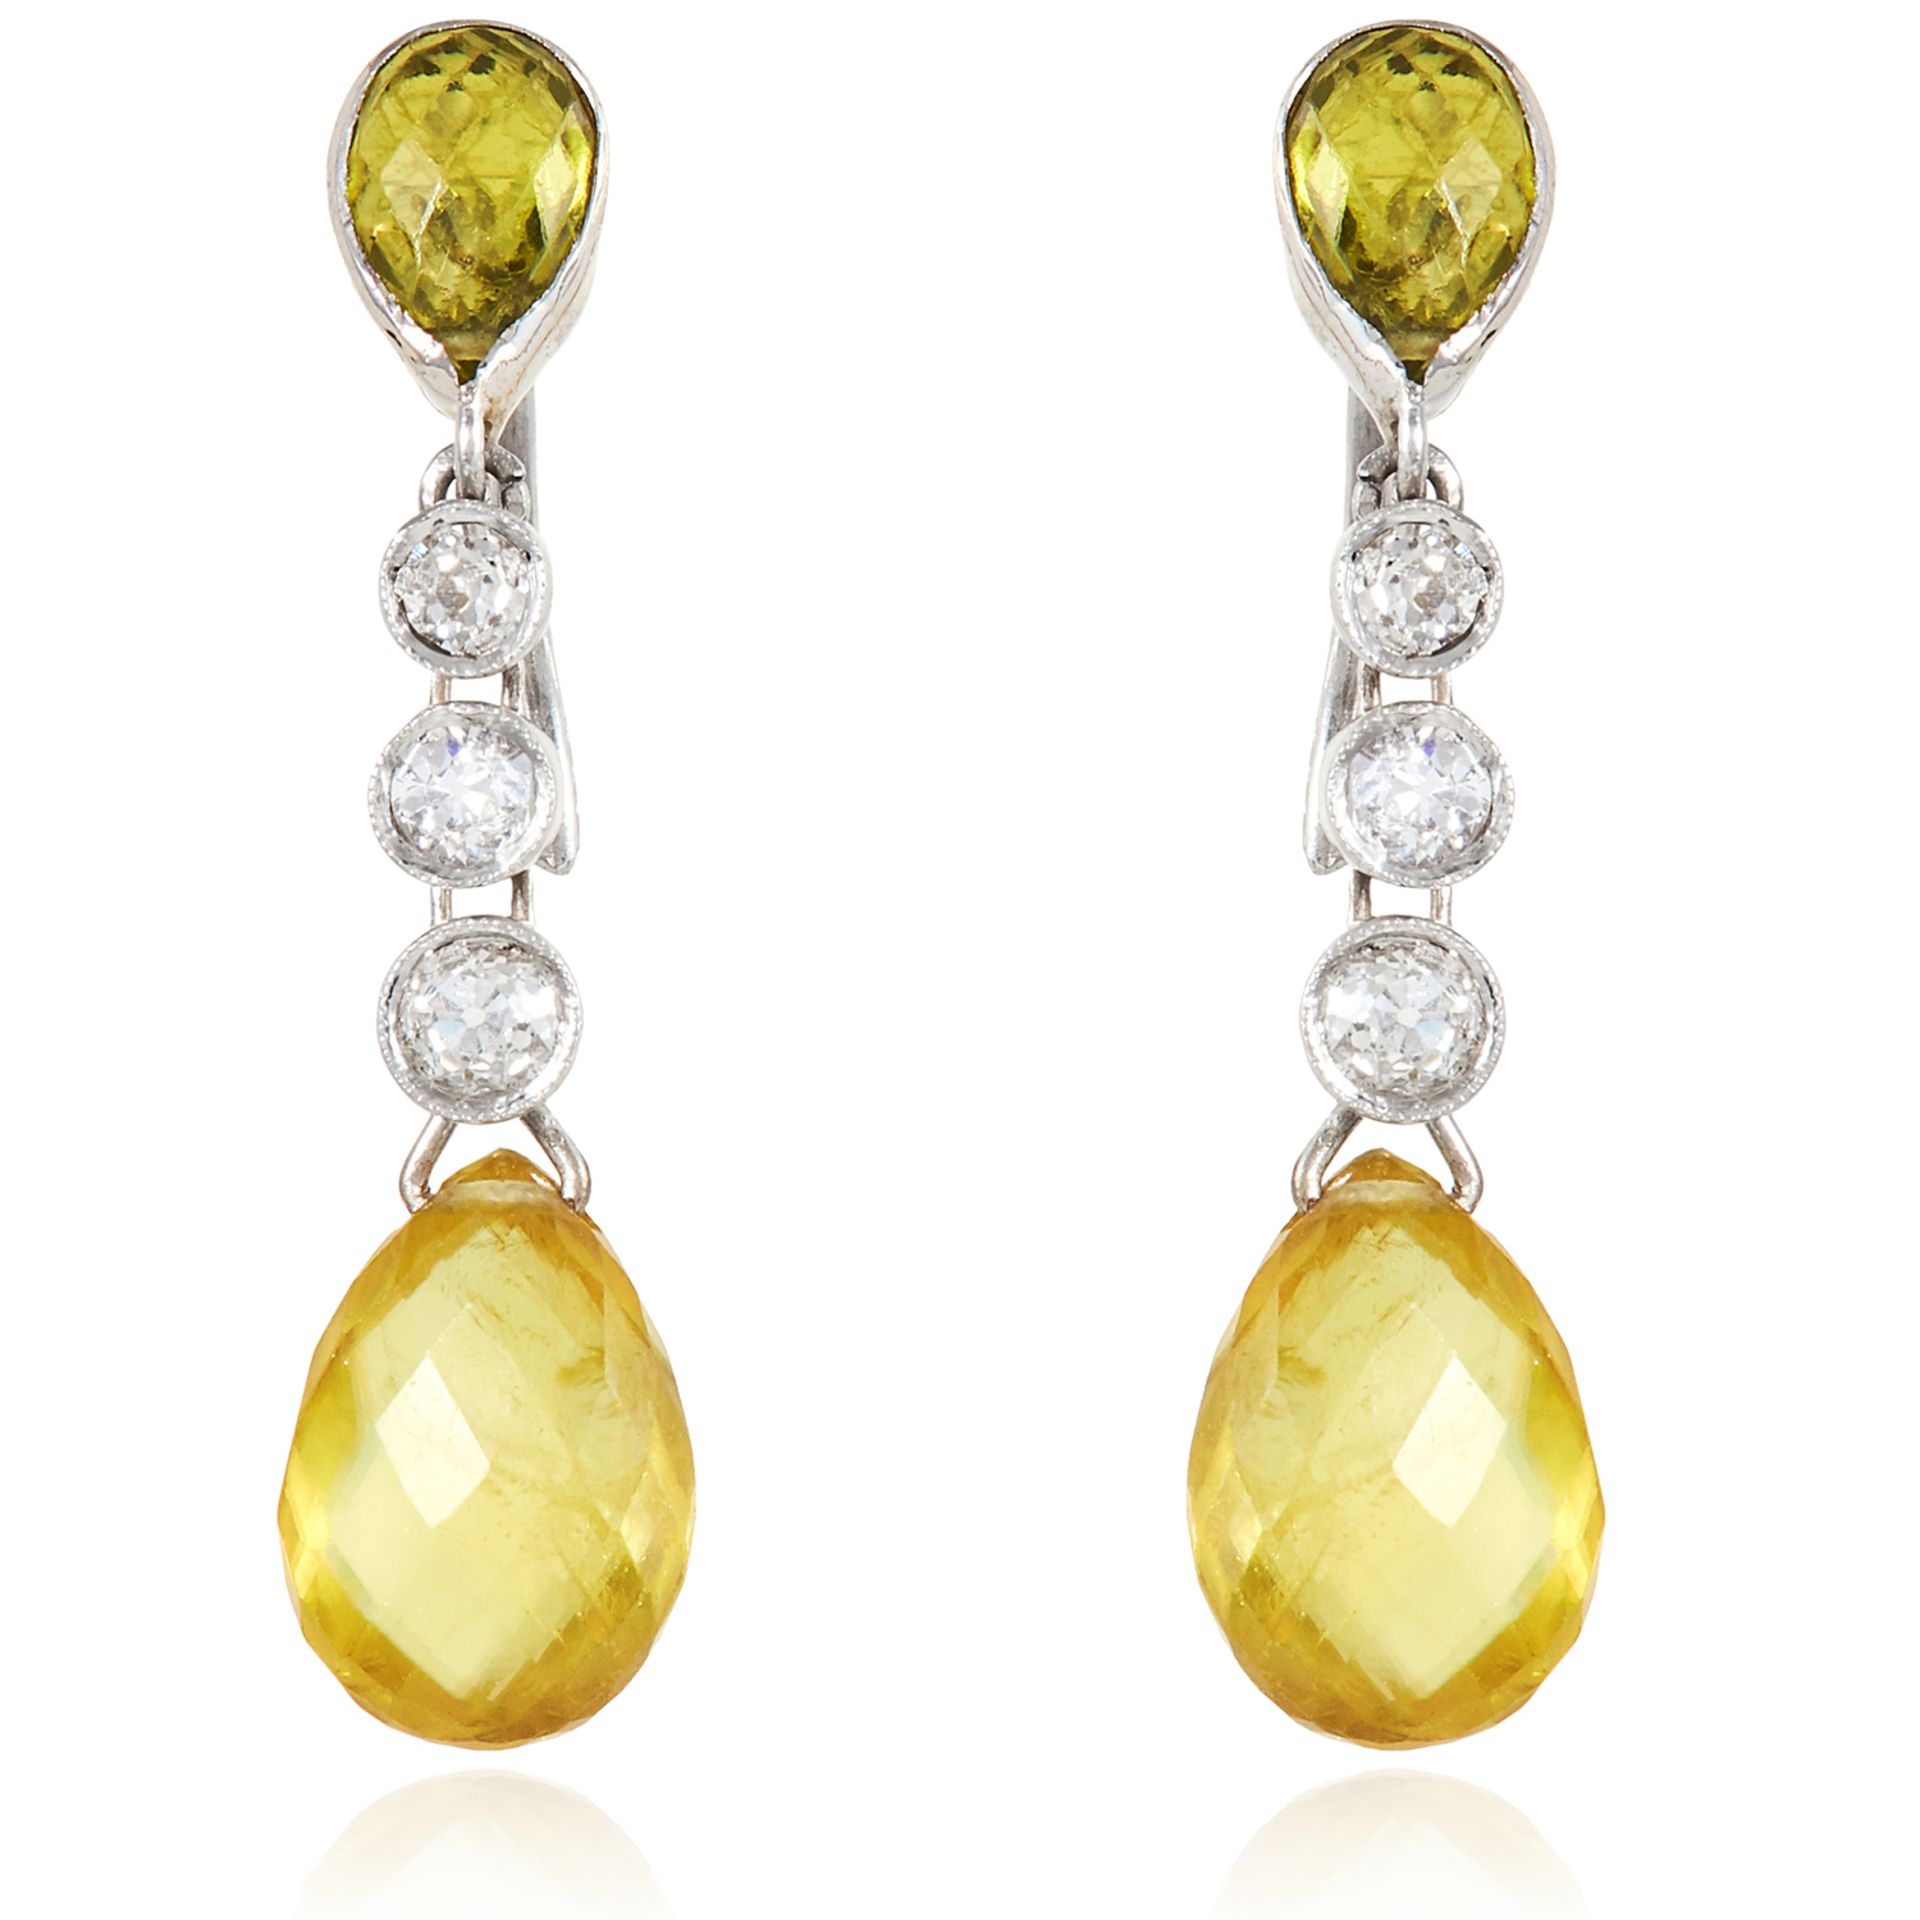 A PAIR OF PERIDOT AND DIAMOND DROP EARRINGS in white gold or platinum, each set with a briolette cut